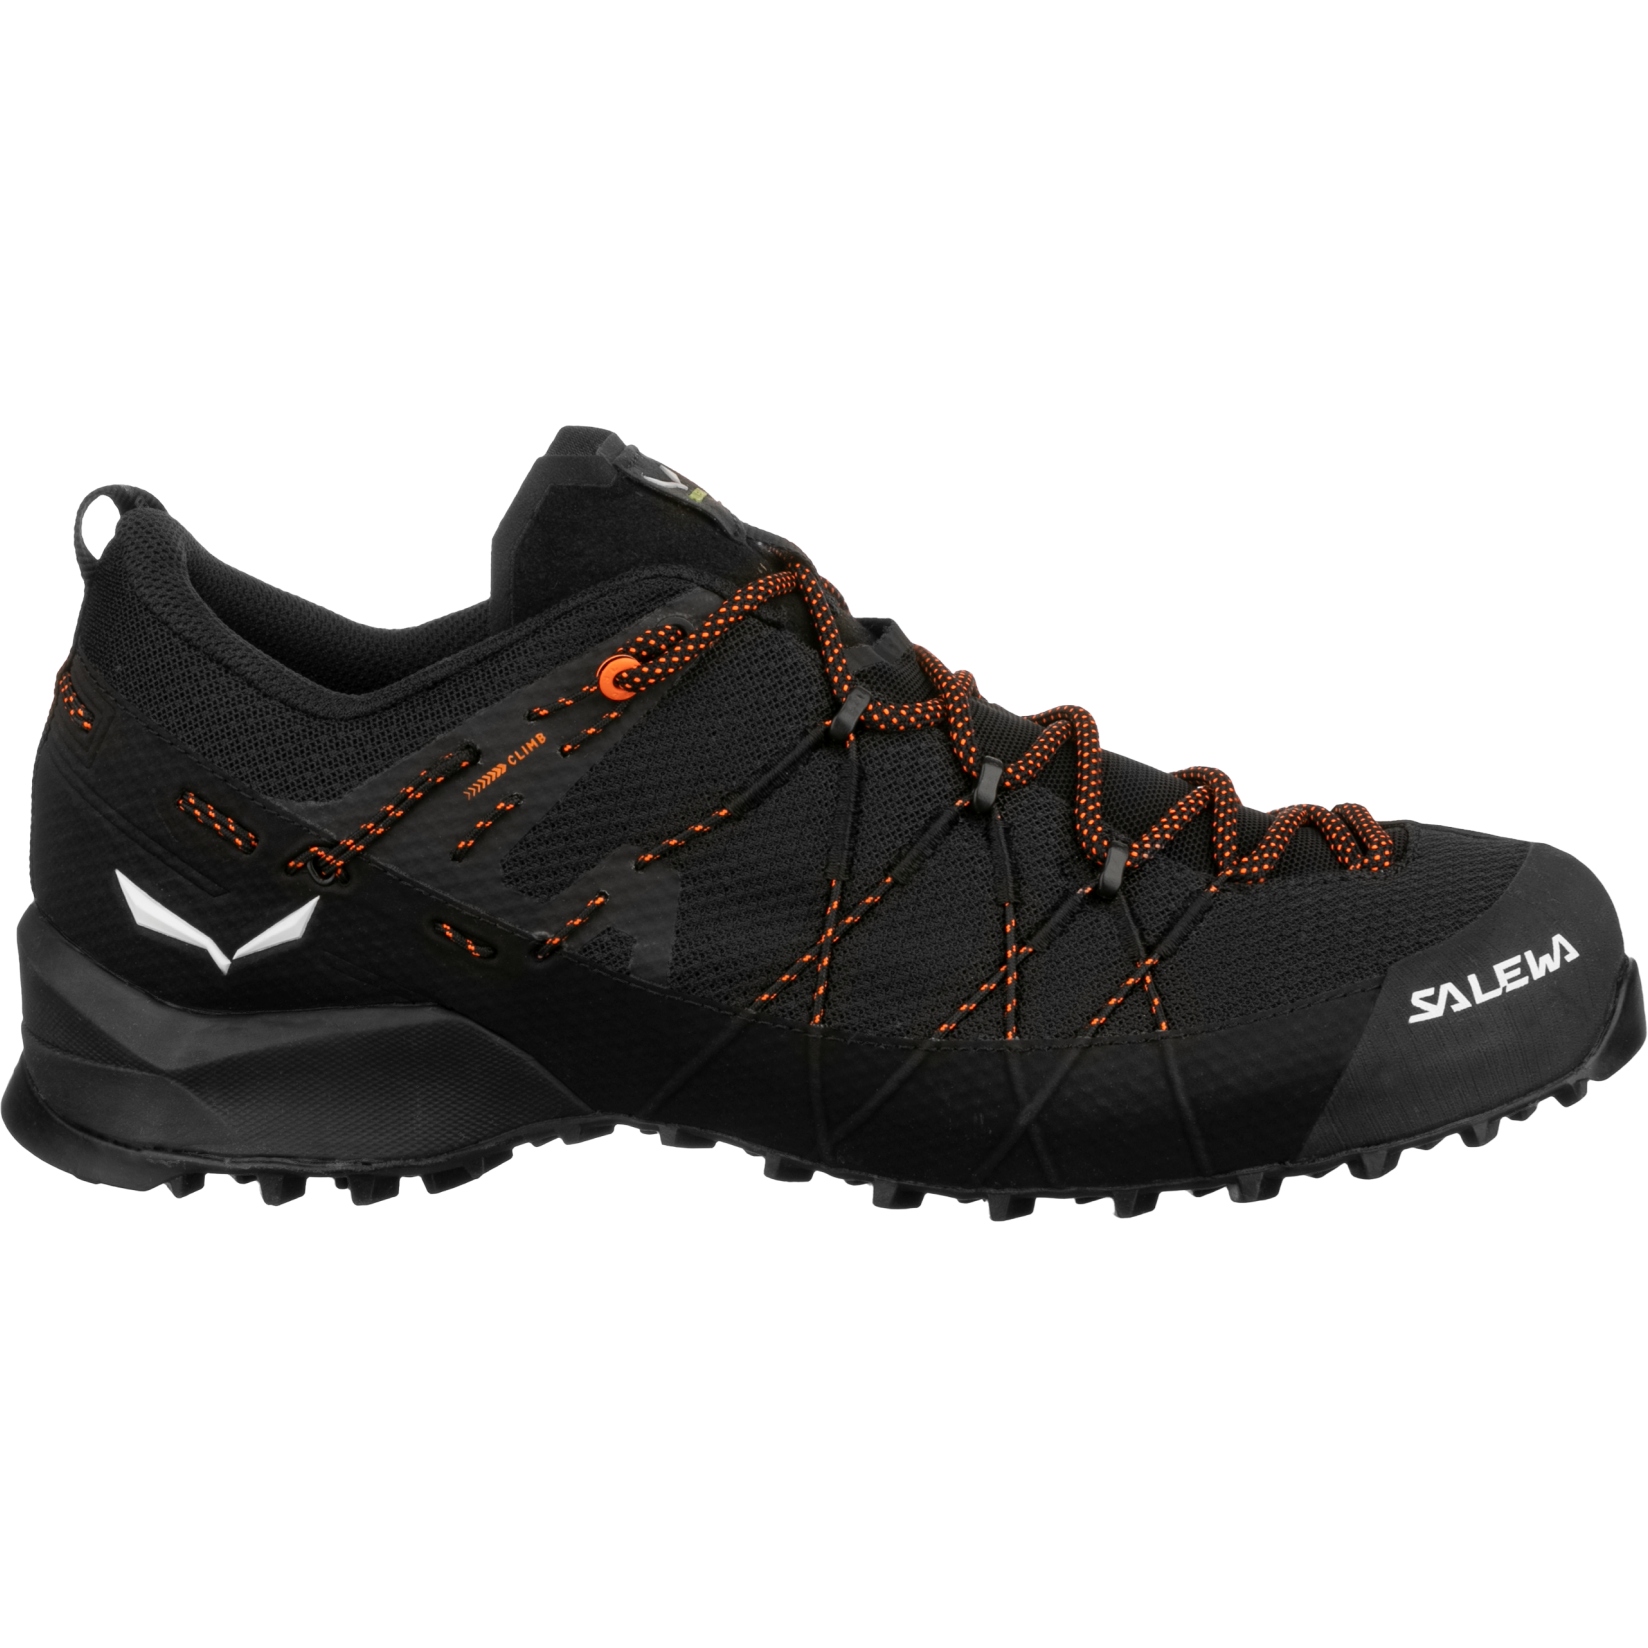 Picture of Salewa Wildfire 2 Approach Shoes - black/black 971